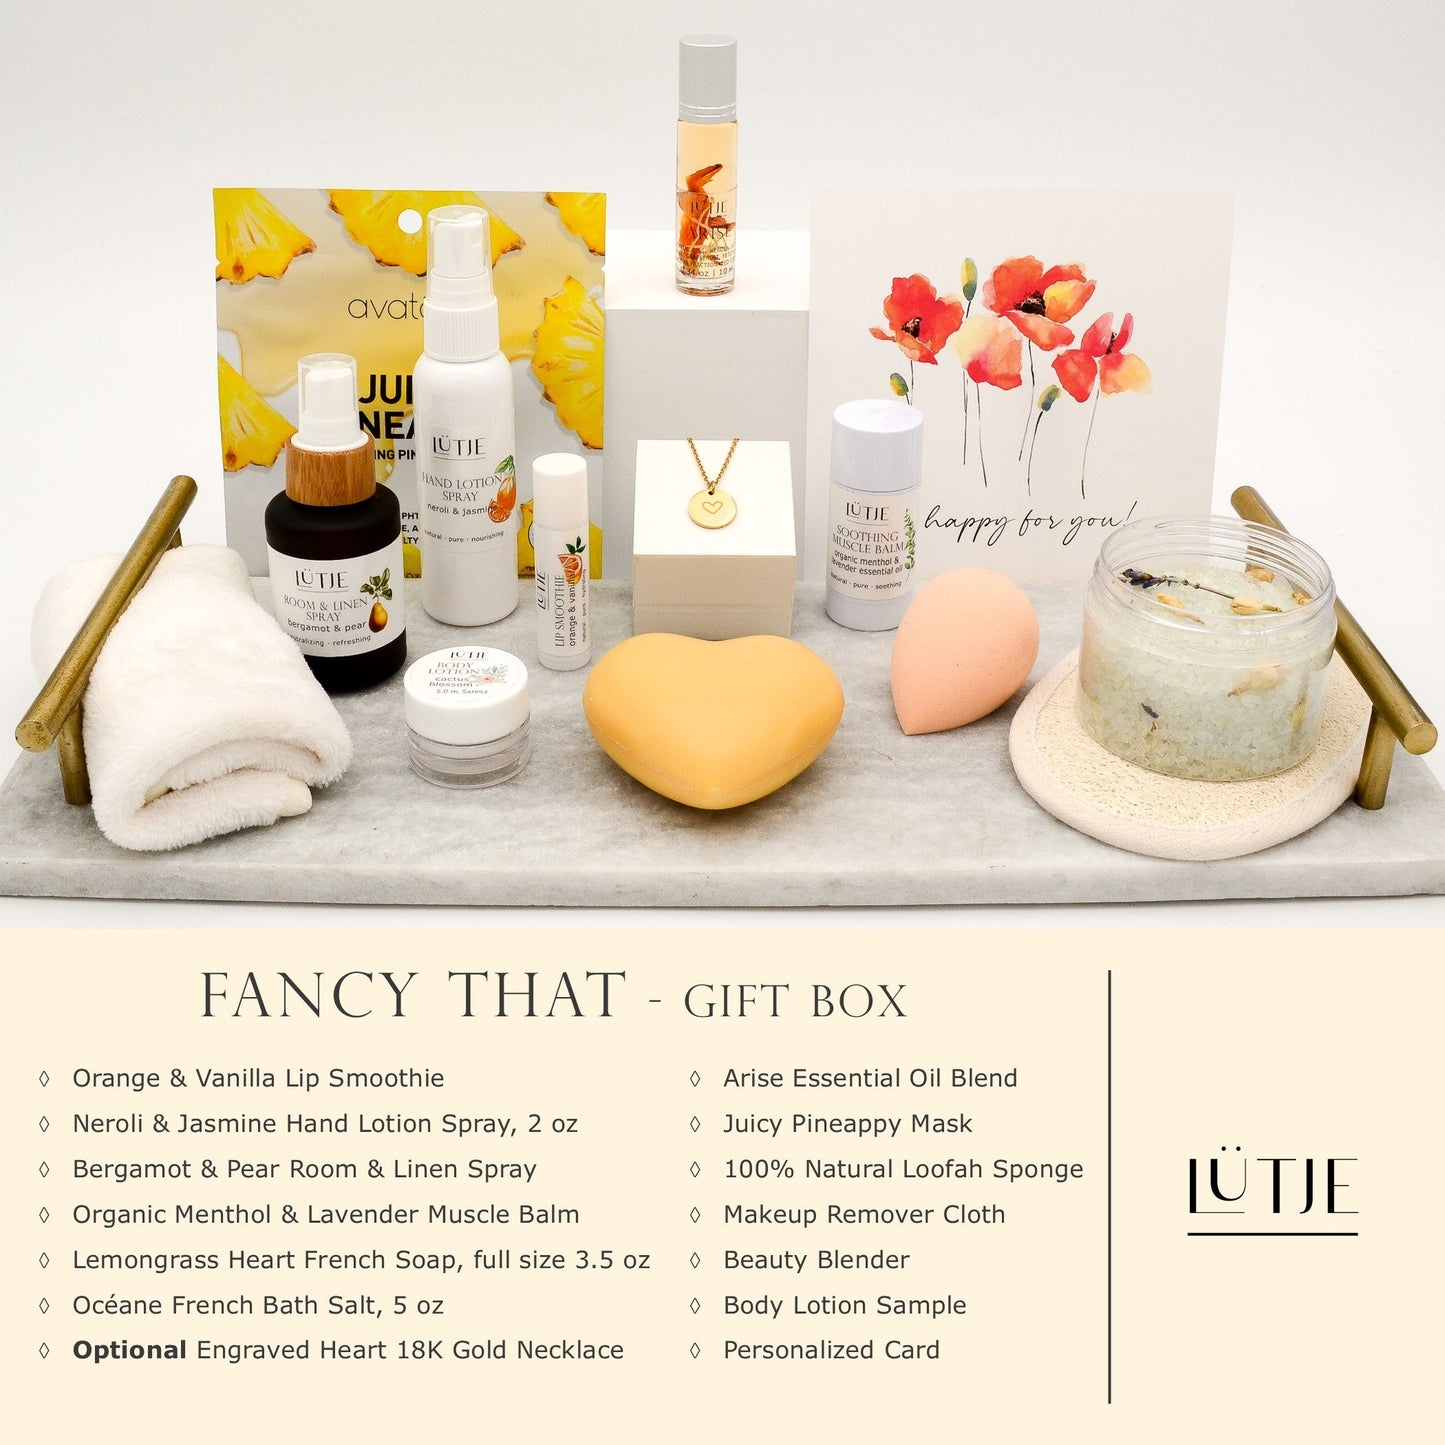 Fancy That Gift Box for women, BFF, wife, daughter, sister, mom, or grandma, includes Neroli & Jasmine hand lotion spray, essential oil, lip balm, soothing muscle balm, Bergamot & Pear room & linen spray, French soap, French bath salts, hydrating face mask, other bath, spa and self-care items, and optional 18K gold-plated necklace with engraved heart.